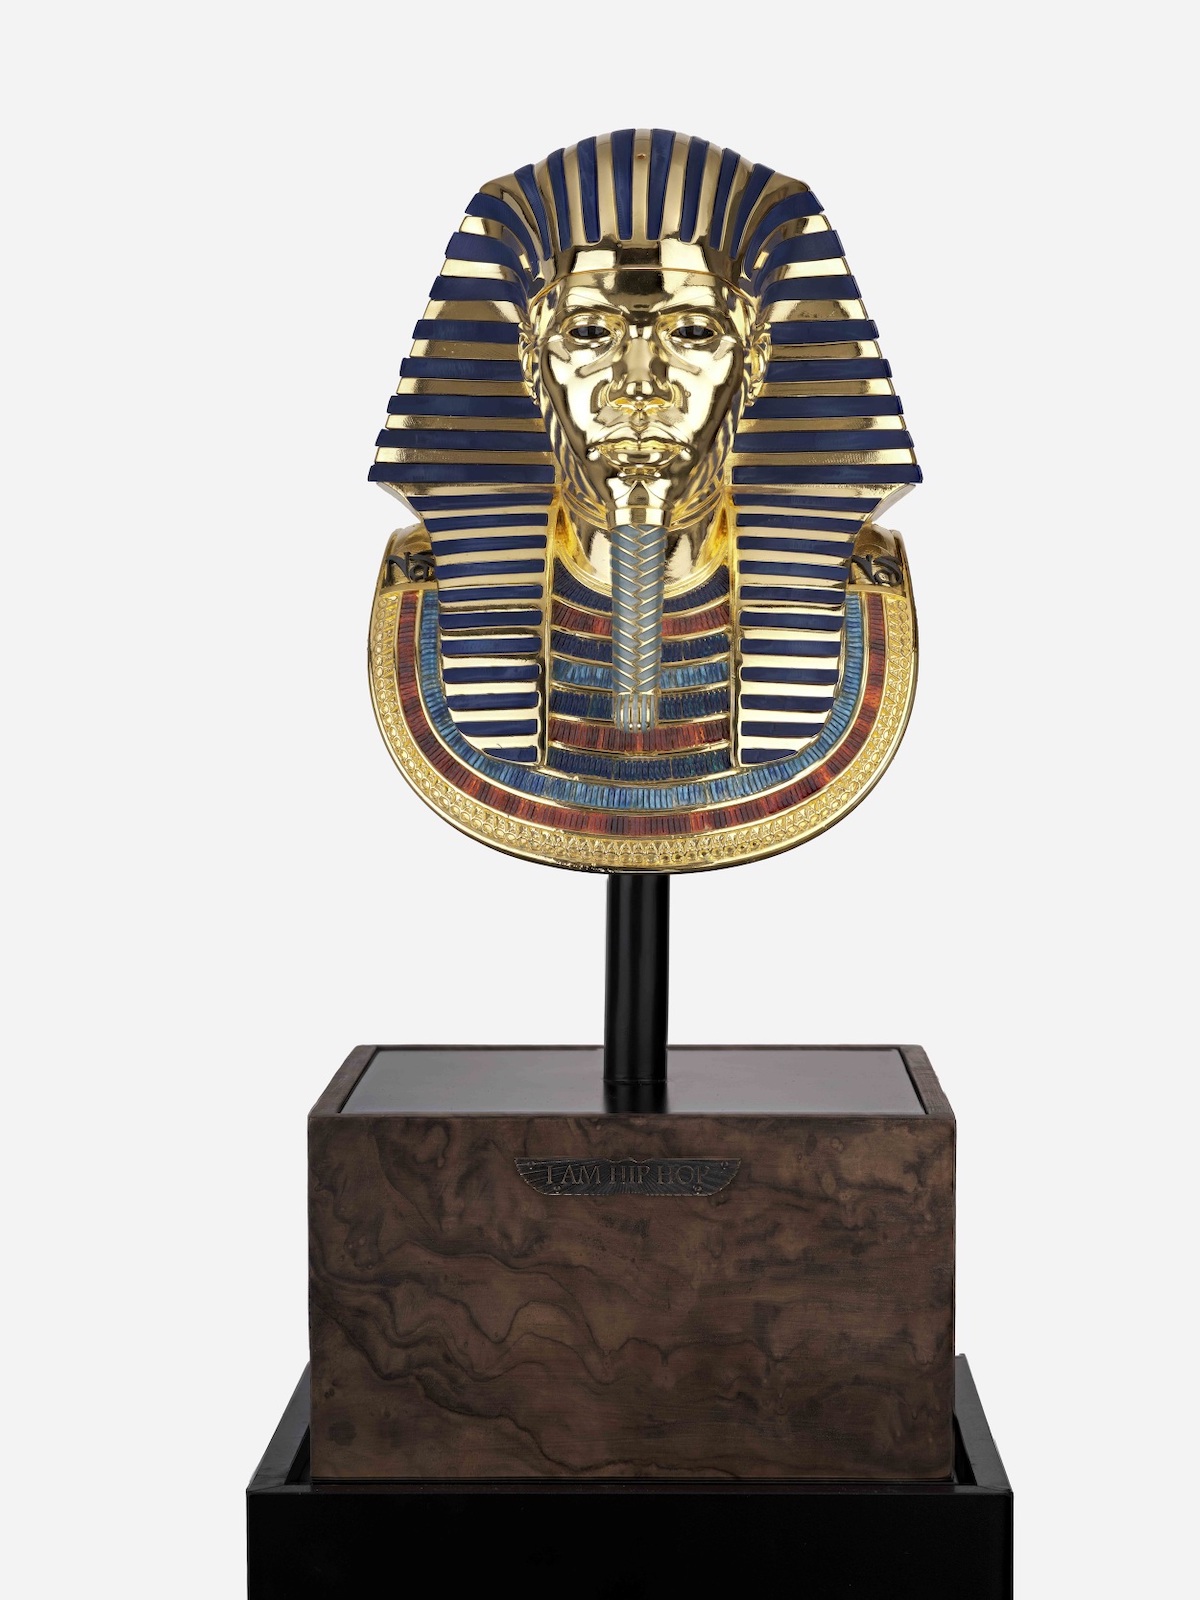 The Artists Behind the ‘Black King Tut’ That Has Outraged Egyptian Critics Speak Out